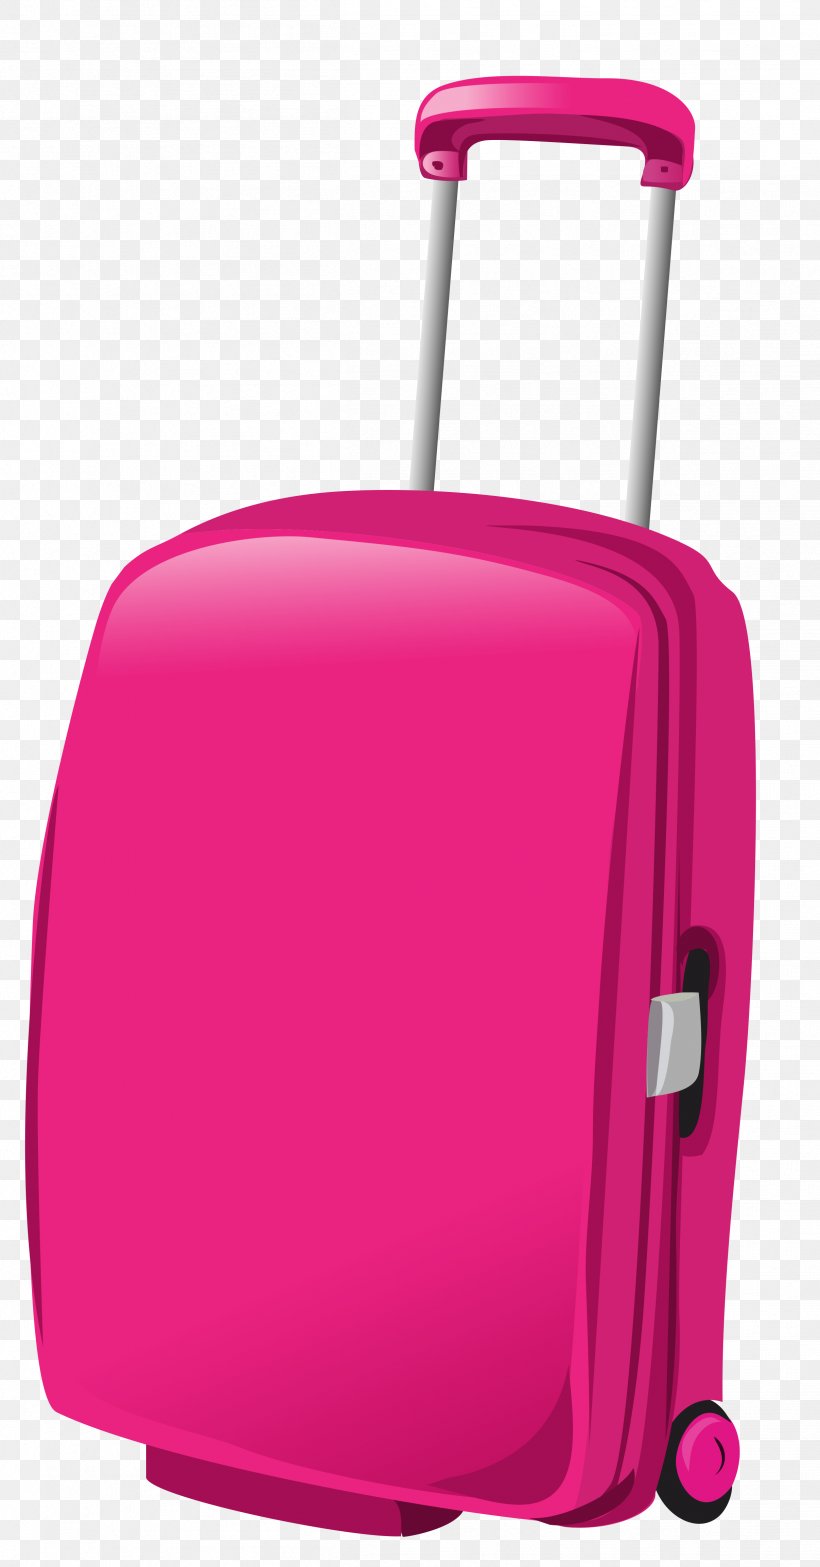 Suitcase Baggage Travel Pink Clip Art, PNG, 2413x4612px, Baggage, Bag, Hand Luggage, Handbag, Luggage Bags Download Free